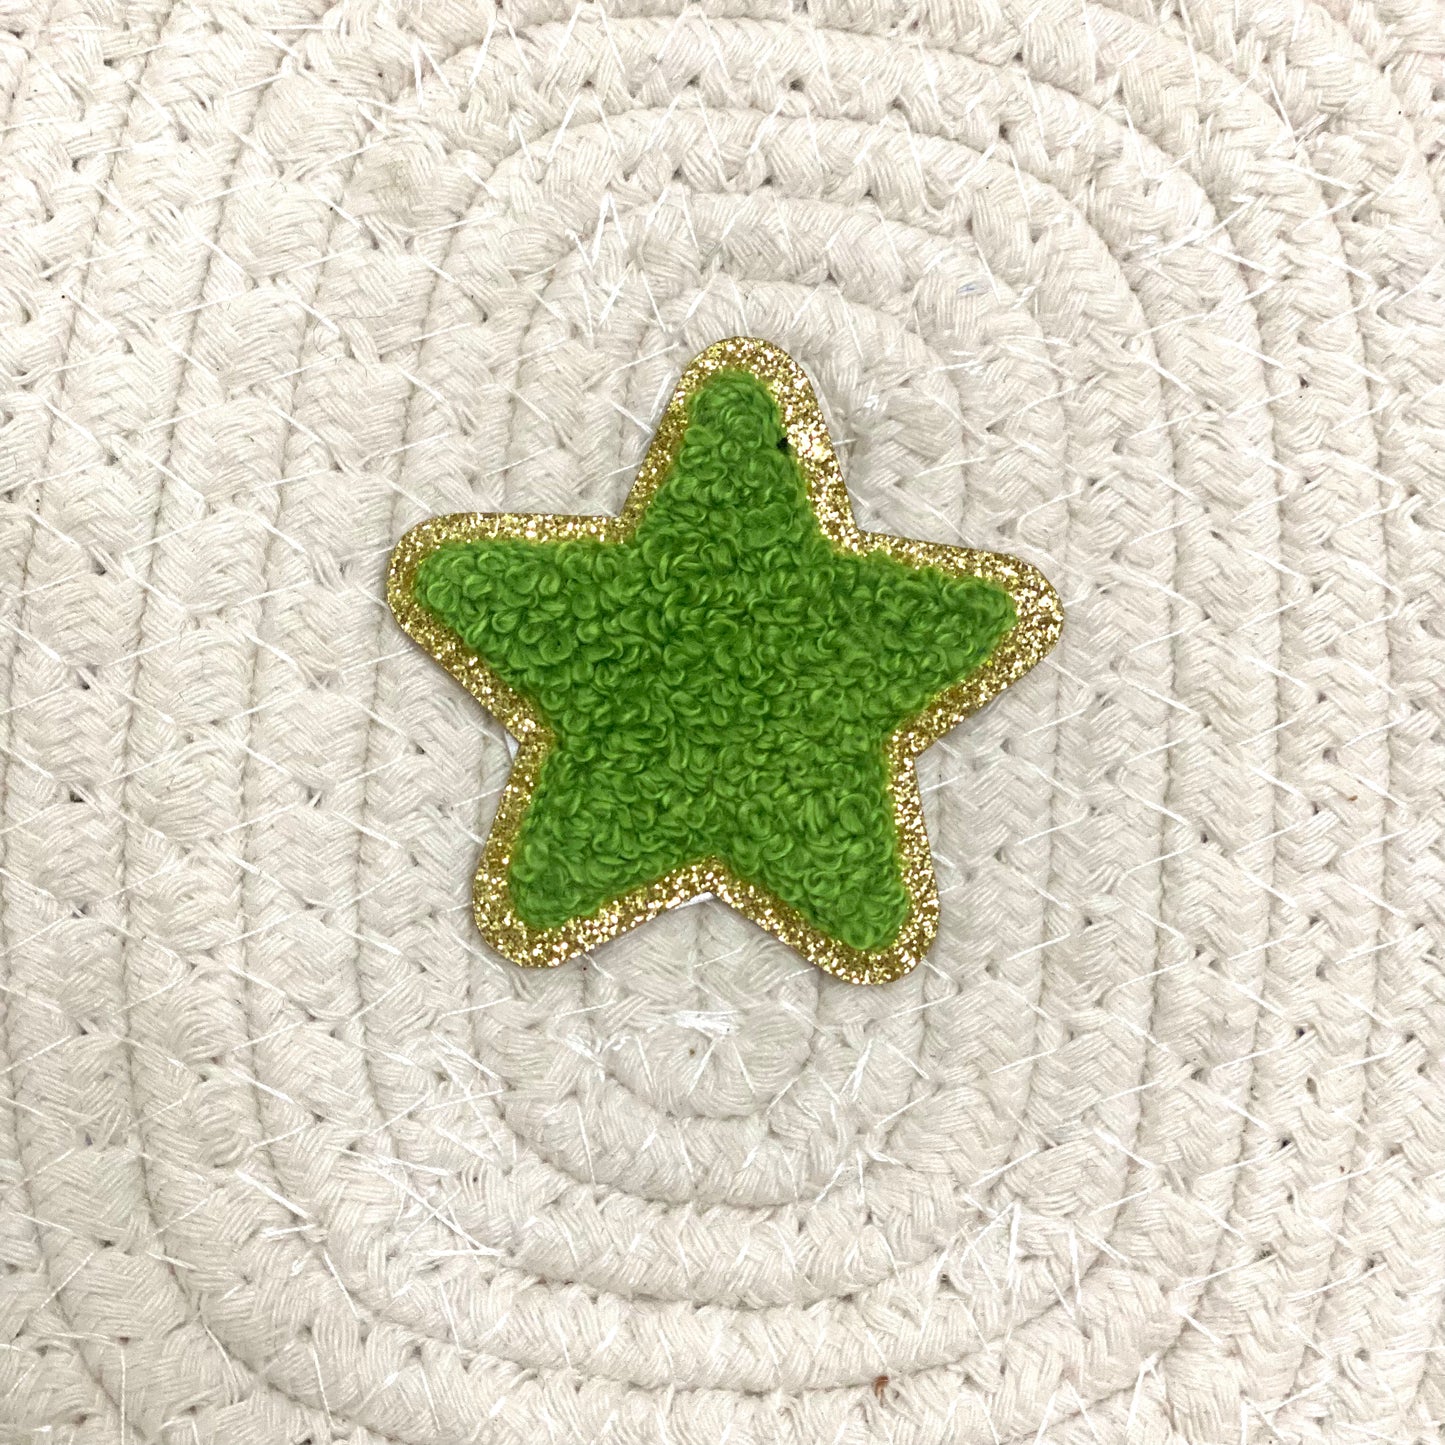 Star Iron On Patch GREEN